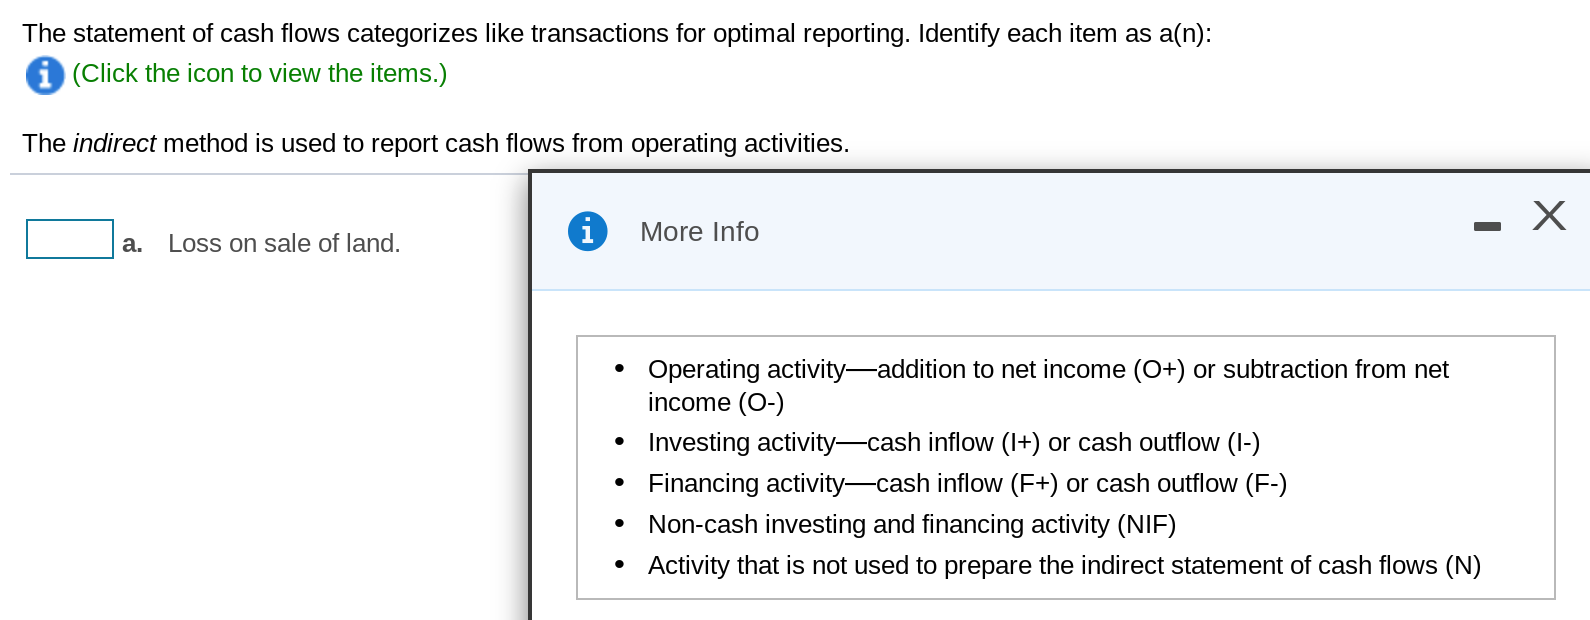 The statement of cash flows categorizes like transactions for optimal reporting. Identify each item as a(n):
(Click the icon to view the items.)
The indirect method is used to report cash flows from operating activities.
a.
Loss on sale of land.
More Info
Operating activity-addition to net income (O+) or subtraction from net
income (O-)
Investing activity-cash inflow (I+) or cash outflow (I-)
Financing activity-cash inflow (F+) or cash outflow (F-)
Non-cash investing and financing activity (NIF)
Activity that is not used to prepare the indirect statement of cash flows (N)
